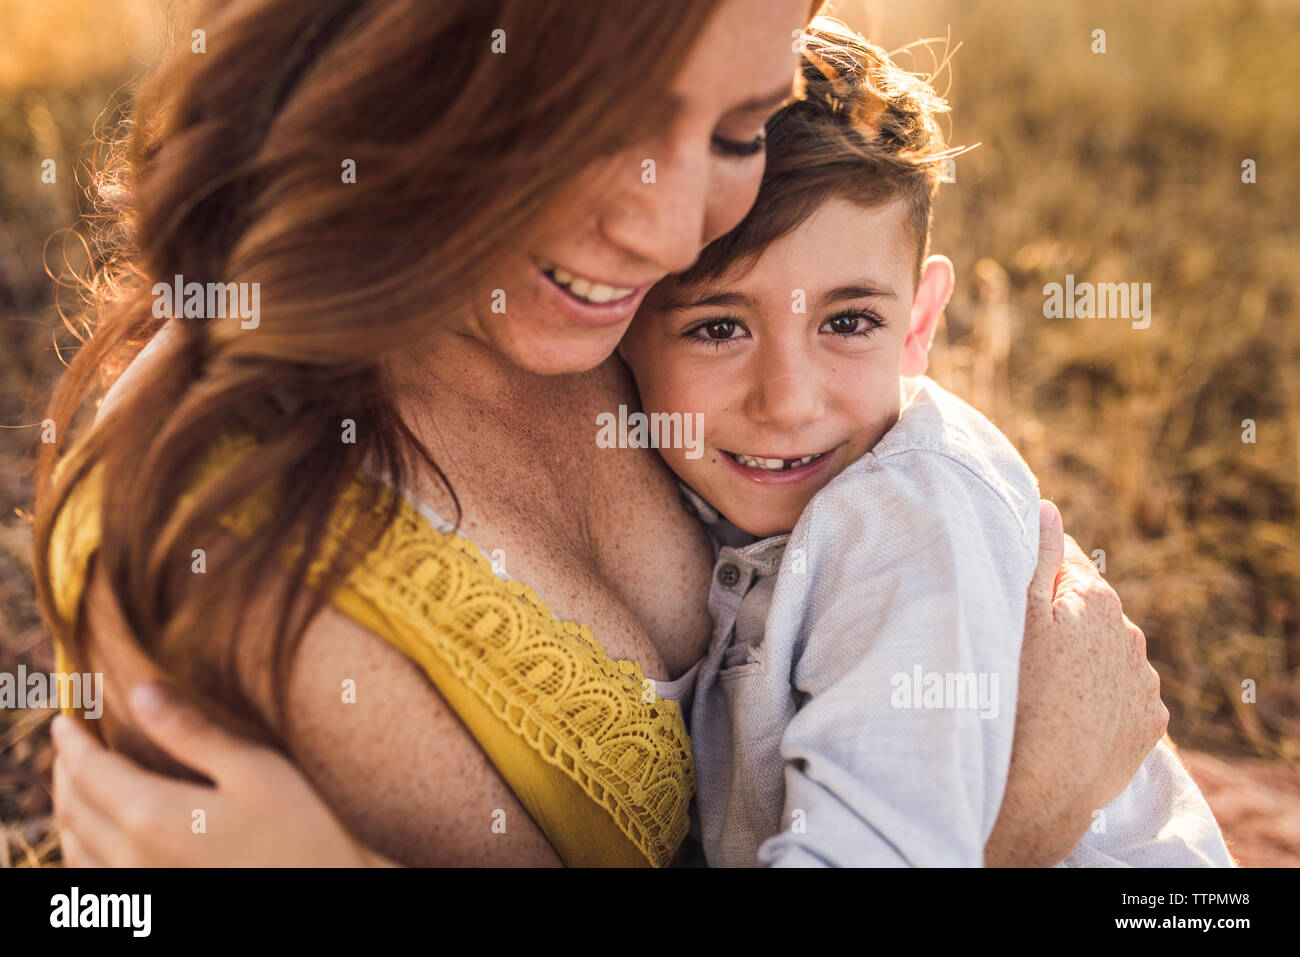 Close up of young boy embraced by smiling mother in California field Stock Photo